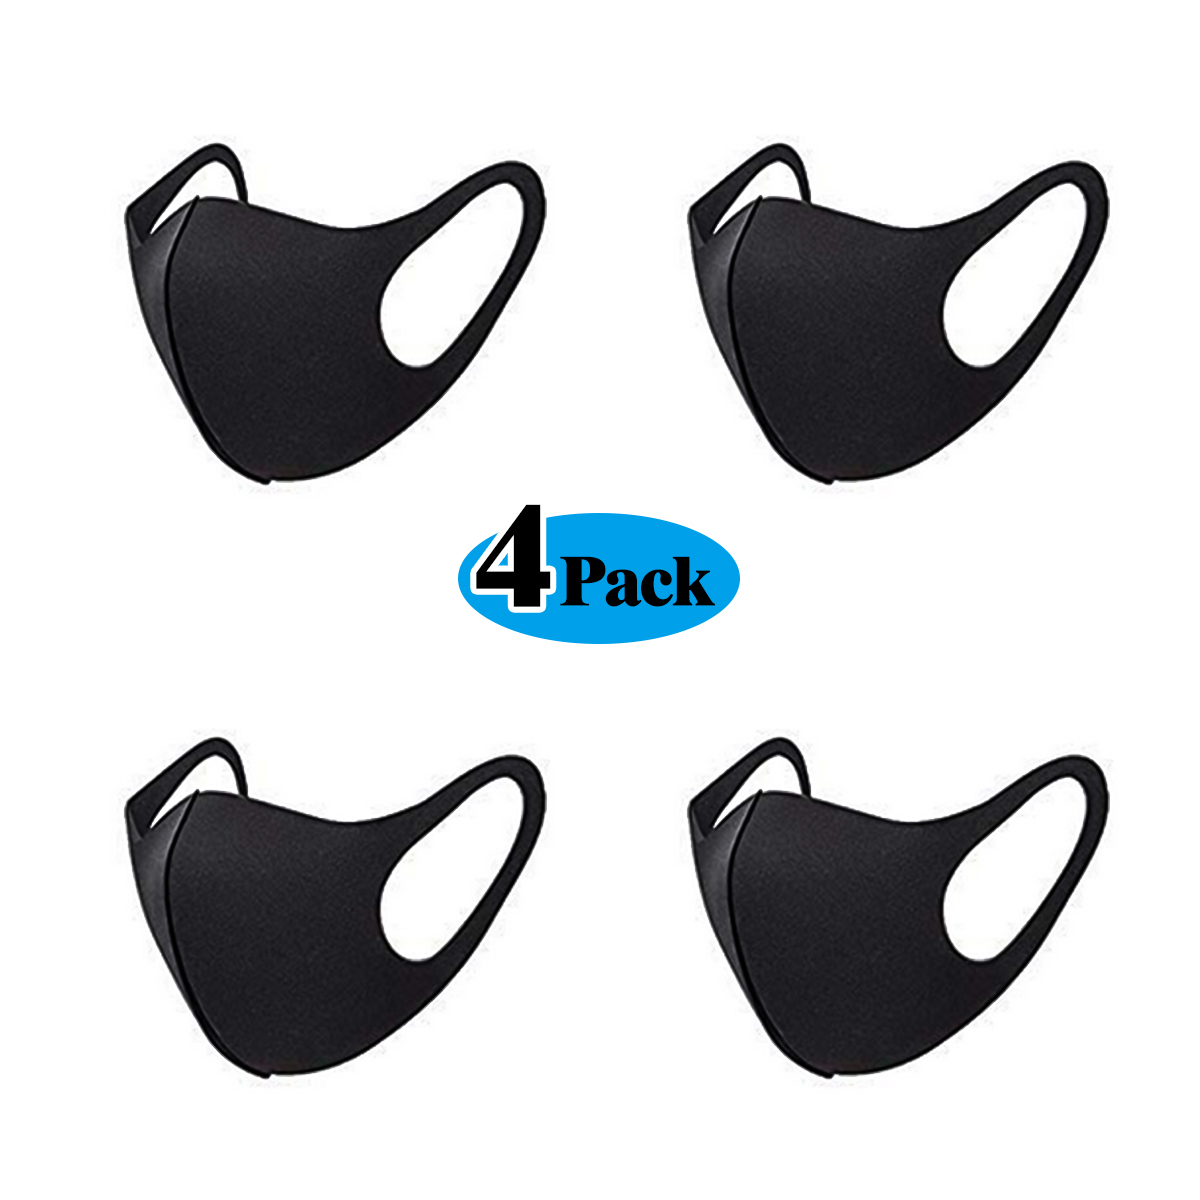 4Pcs-Fashion-Protective-Face-Mask-Anti-Dust-Mask-Washable-Reusable-for-Cycling-Camping-Travel-1665908-1